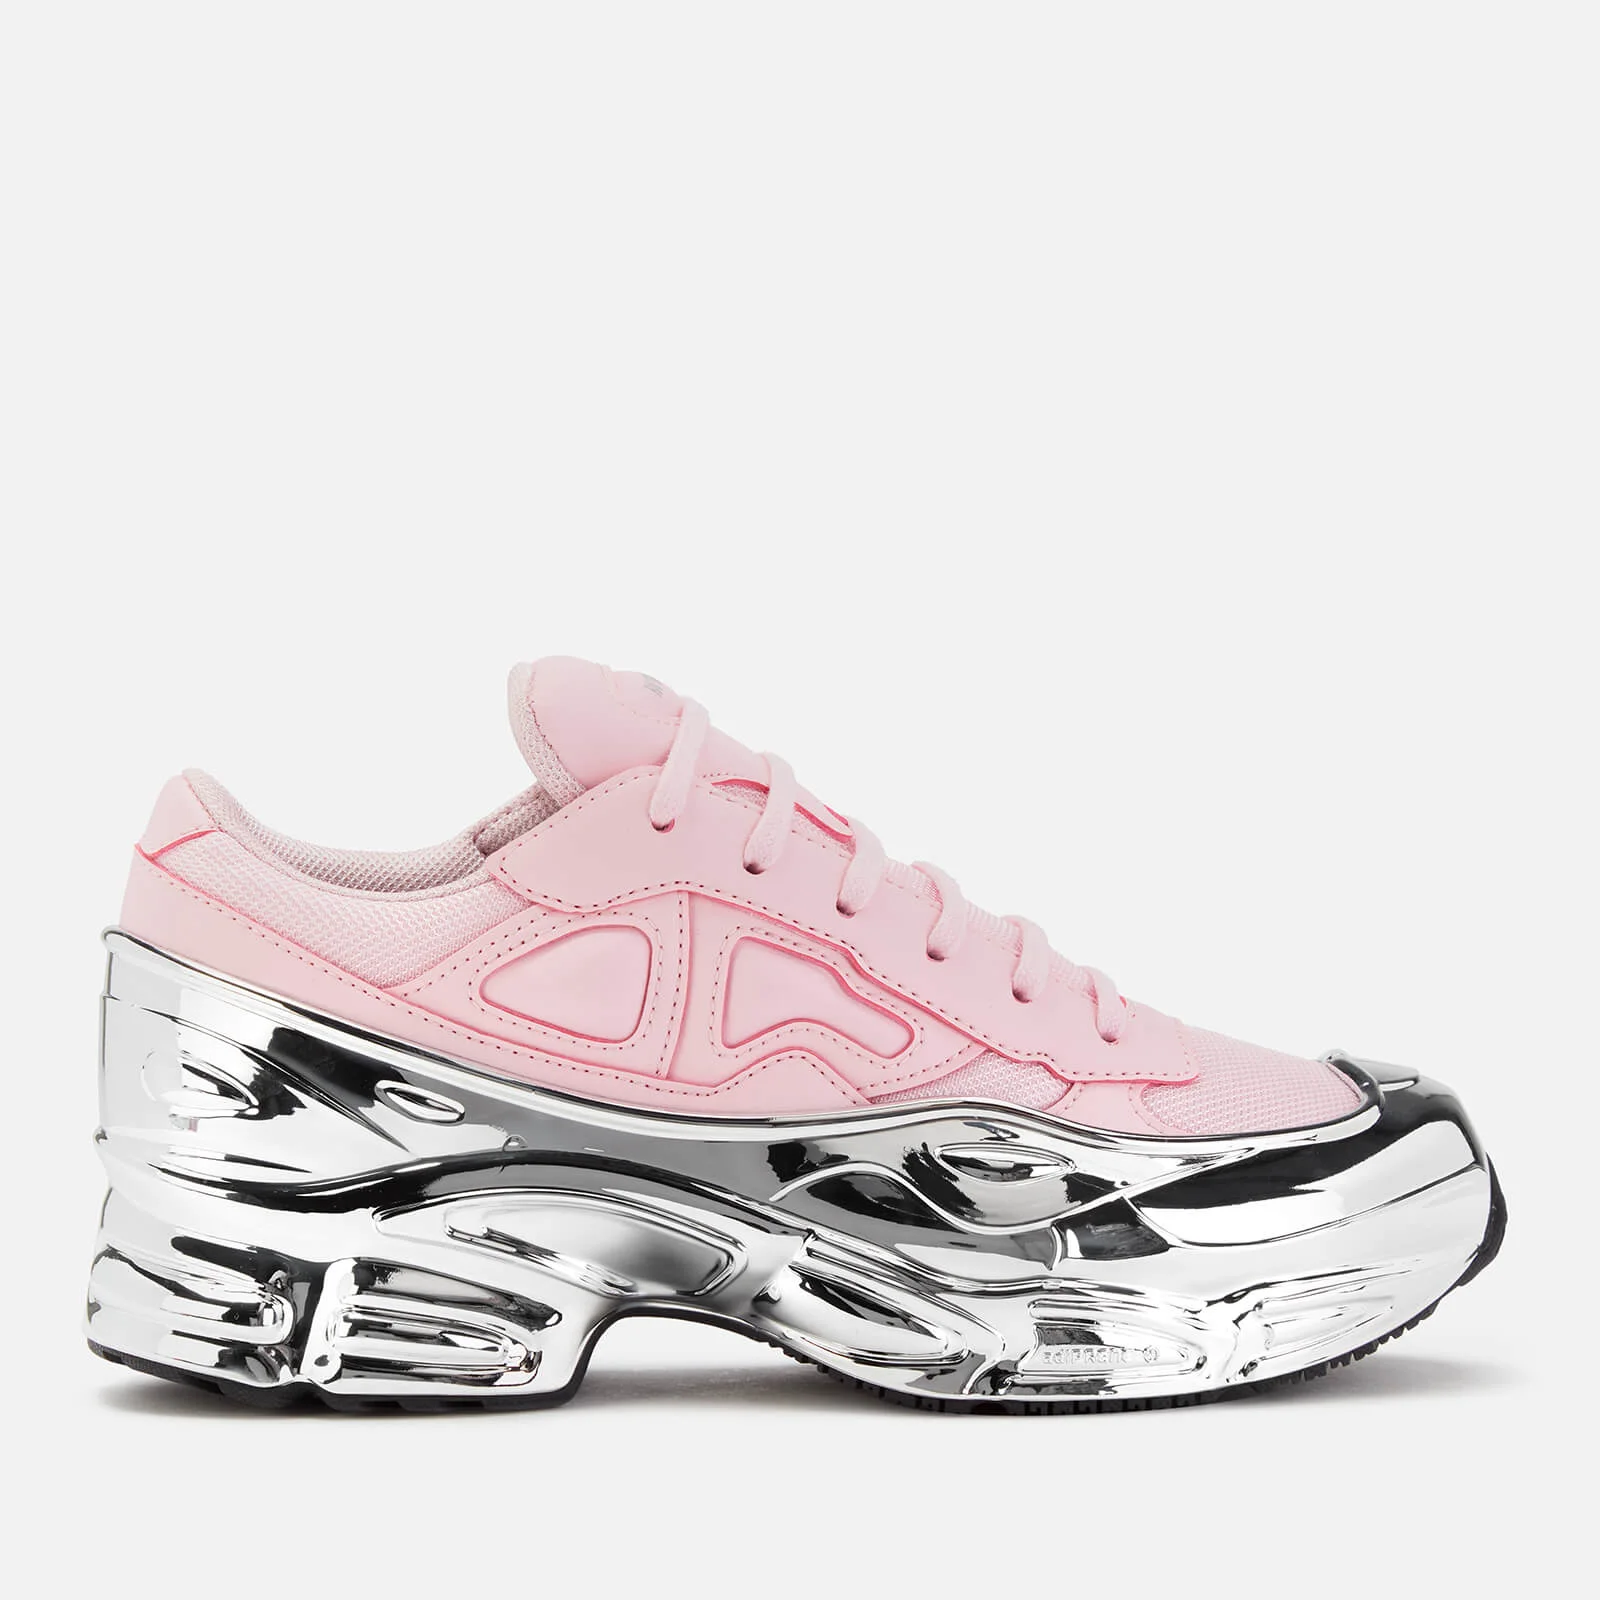 adidas by Raf Simons Women's Ozweego Trainers - CL Pink/Silver Image 1